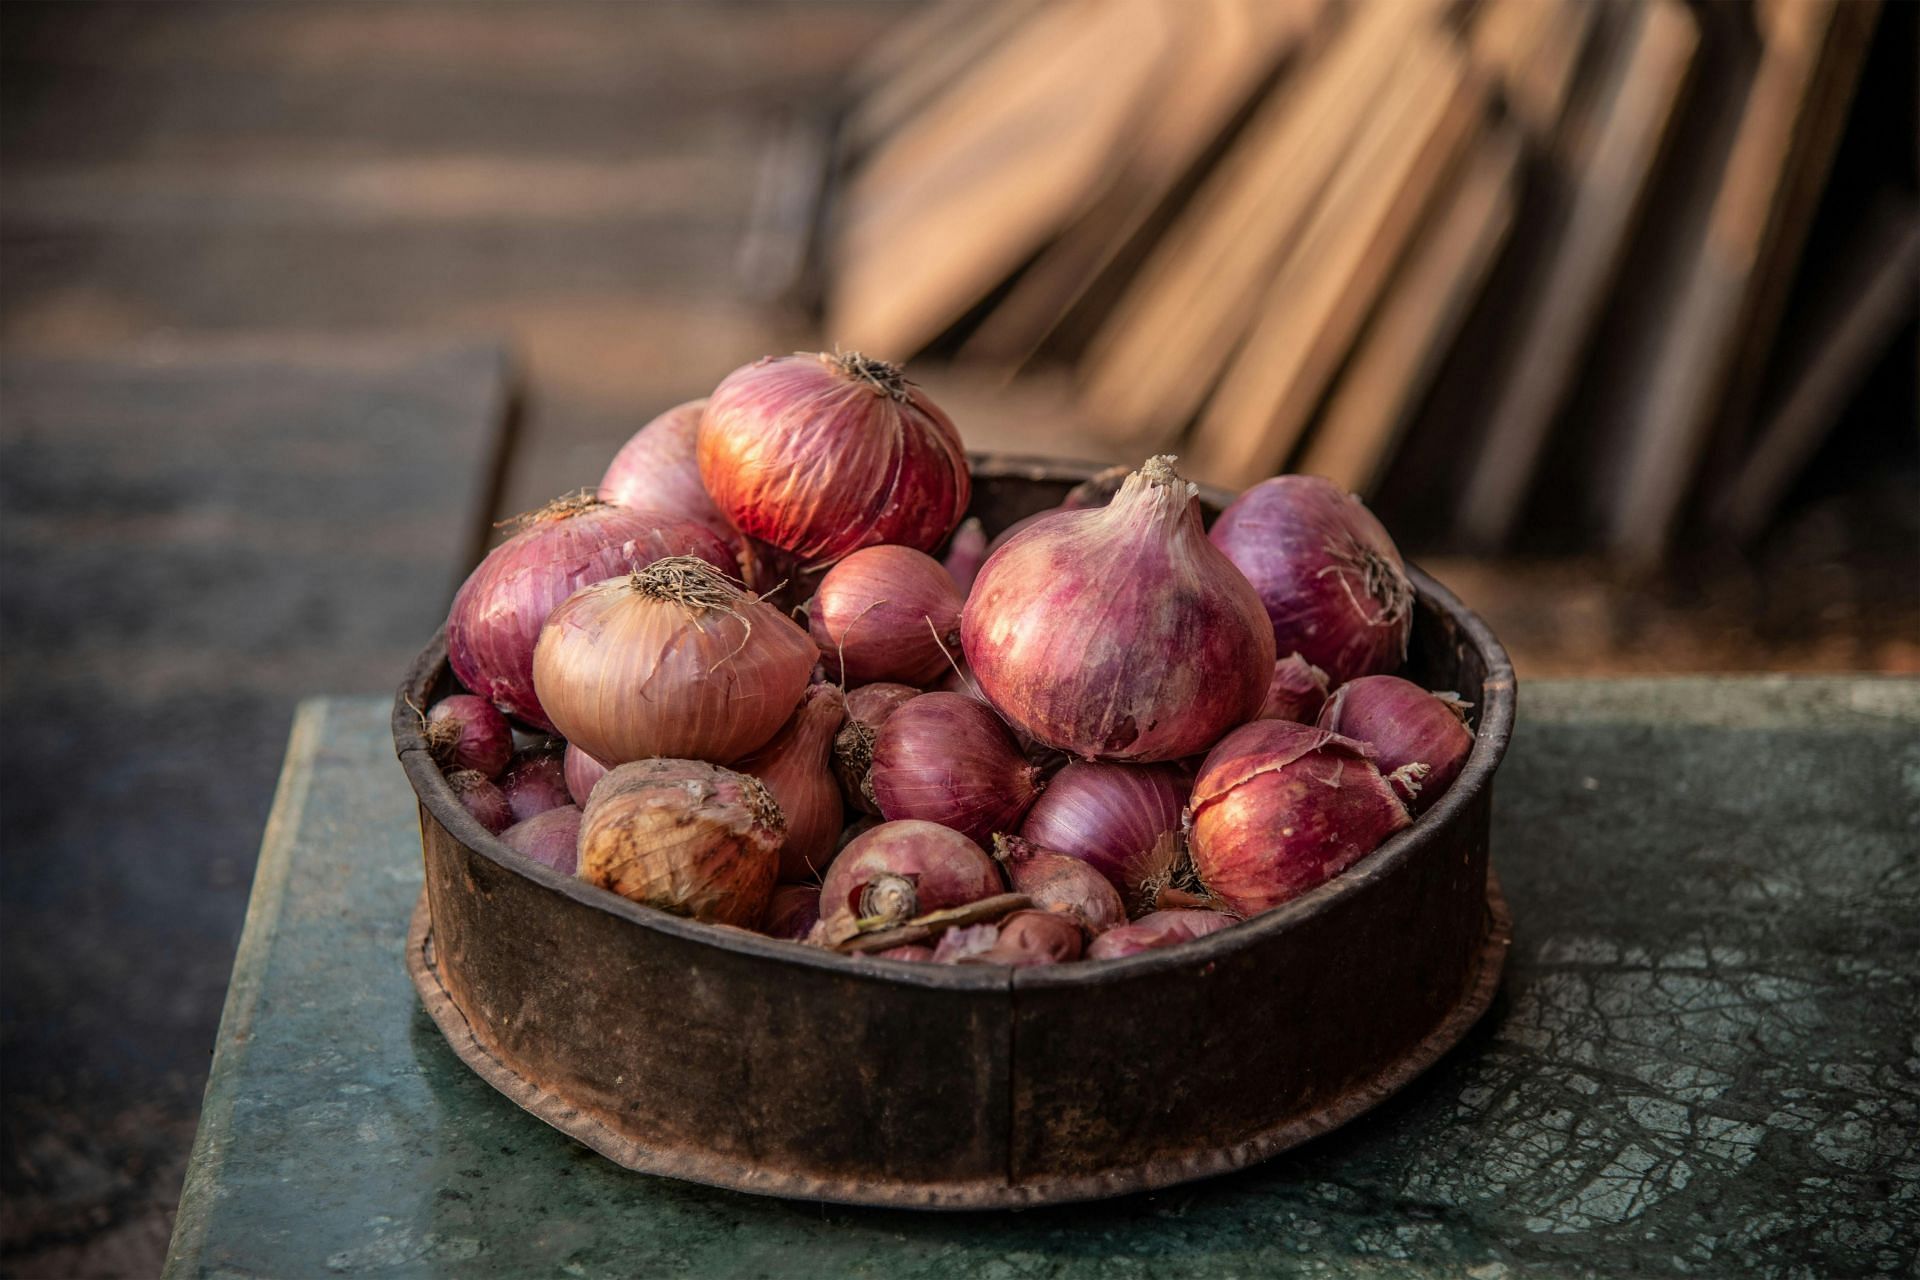 Benefits of onions (image sourced via Pexels / Photo by rujukhan)